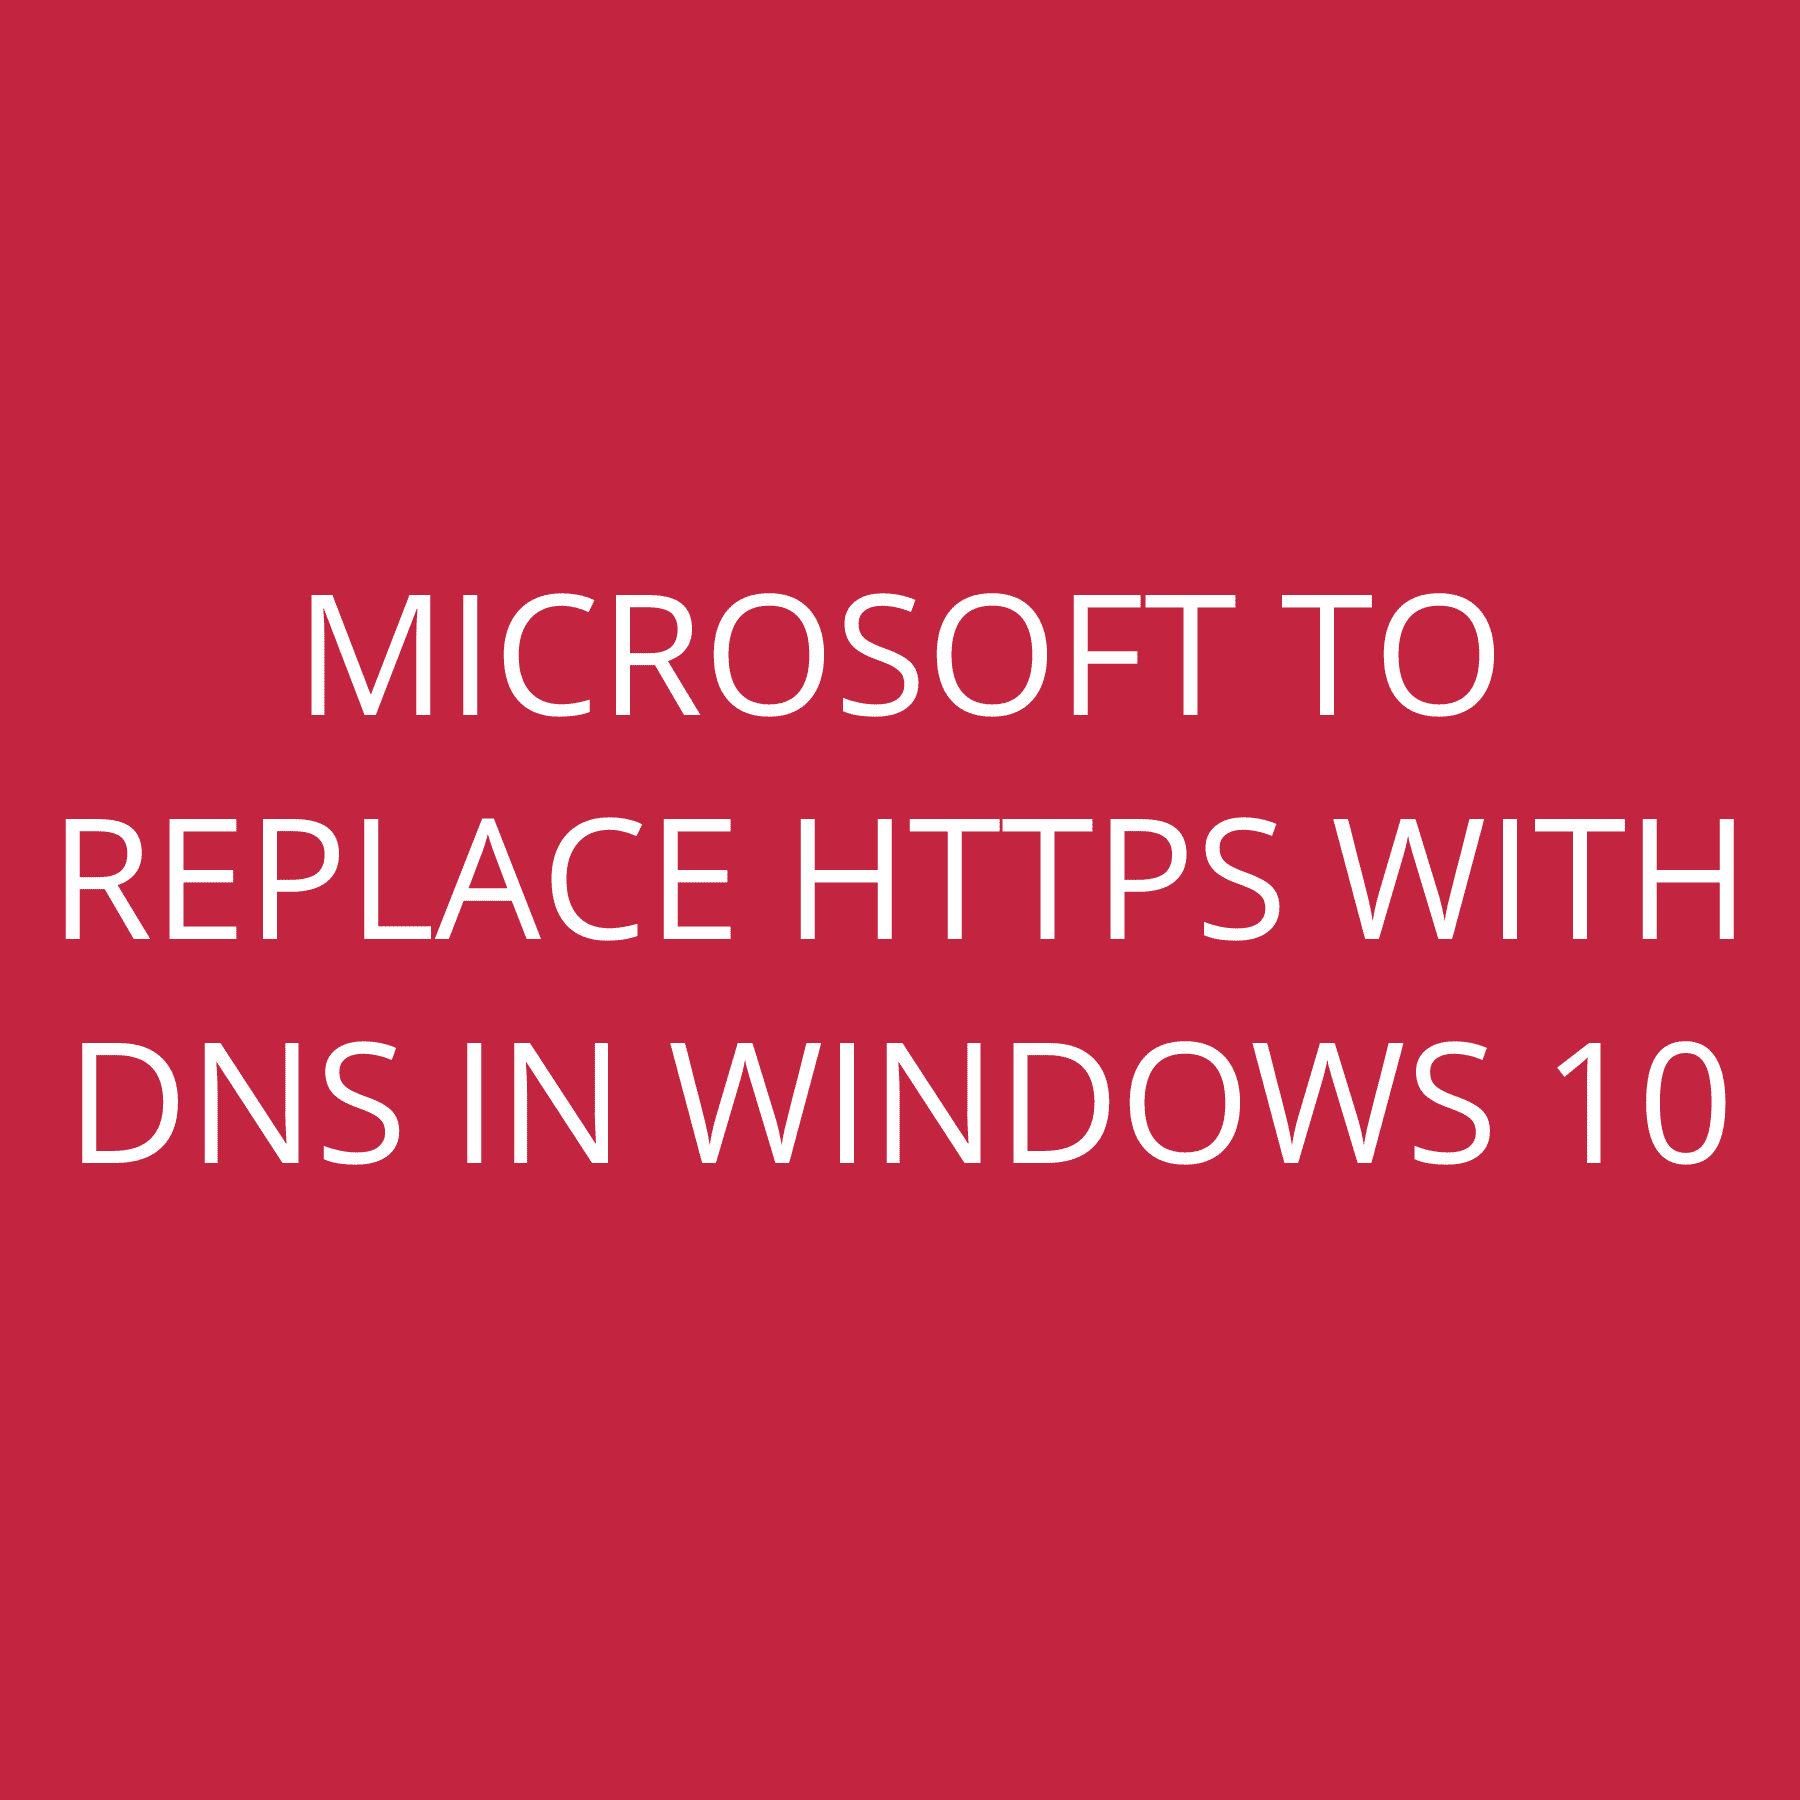 Microsoft to replace HTTPS with DNS in Windows 10